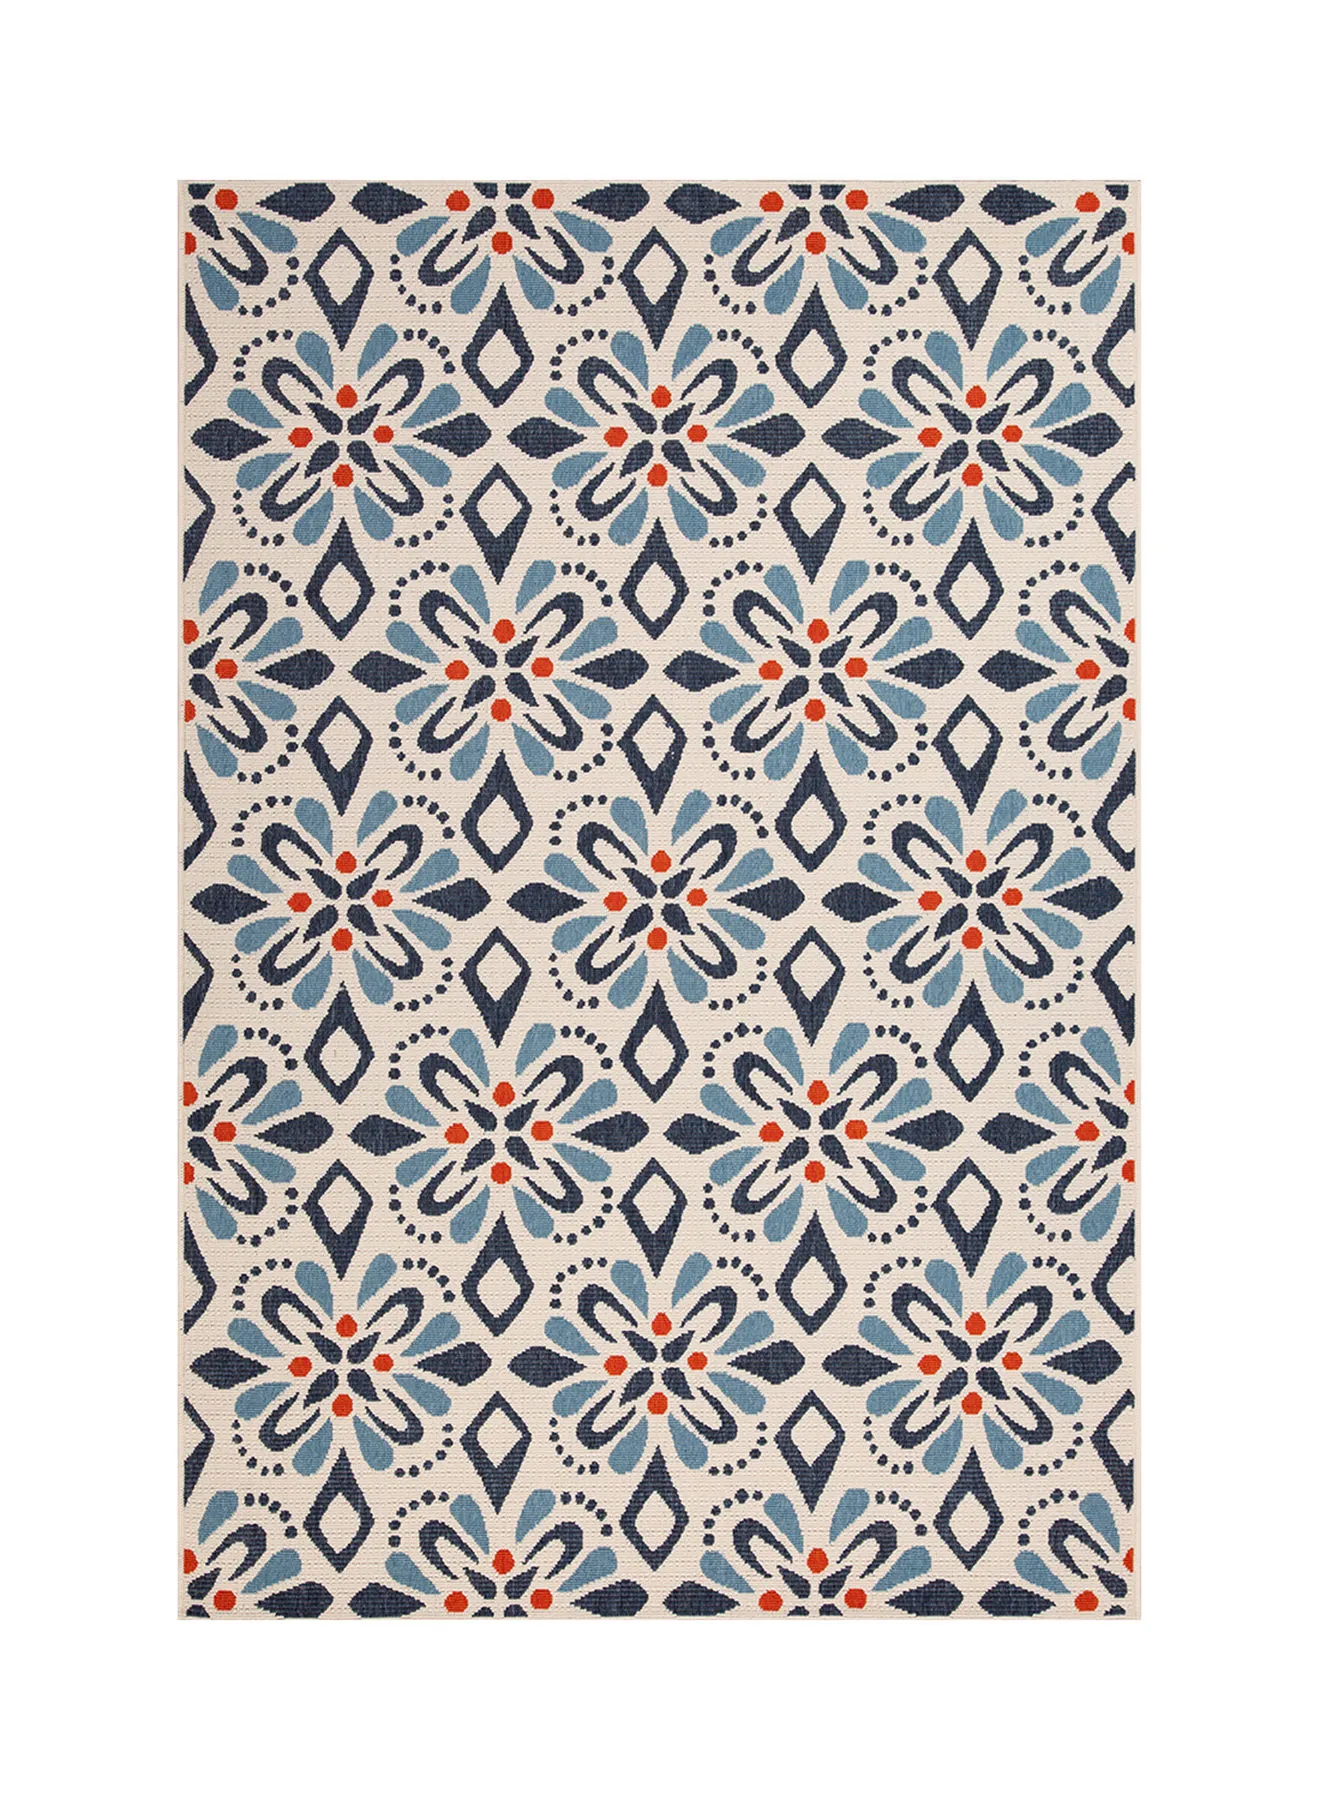 ebb & flow L. Tributary Outdoor Unique Luxury Quality Material Carpet For The Perfect Stylish Home 5994W Blue/Ivory 280 x 380cm